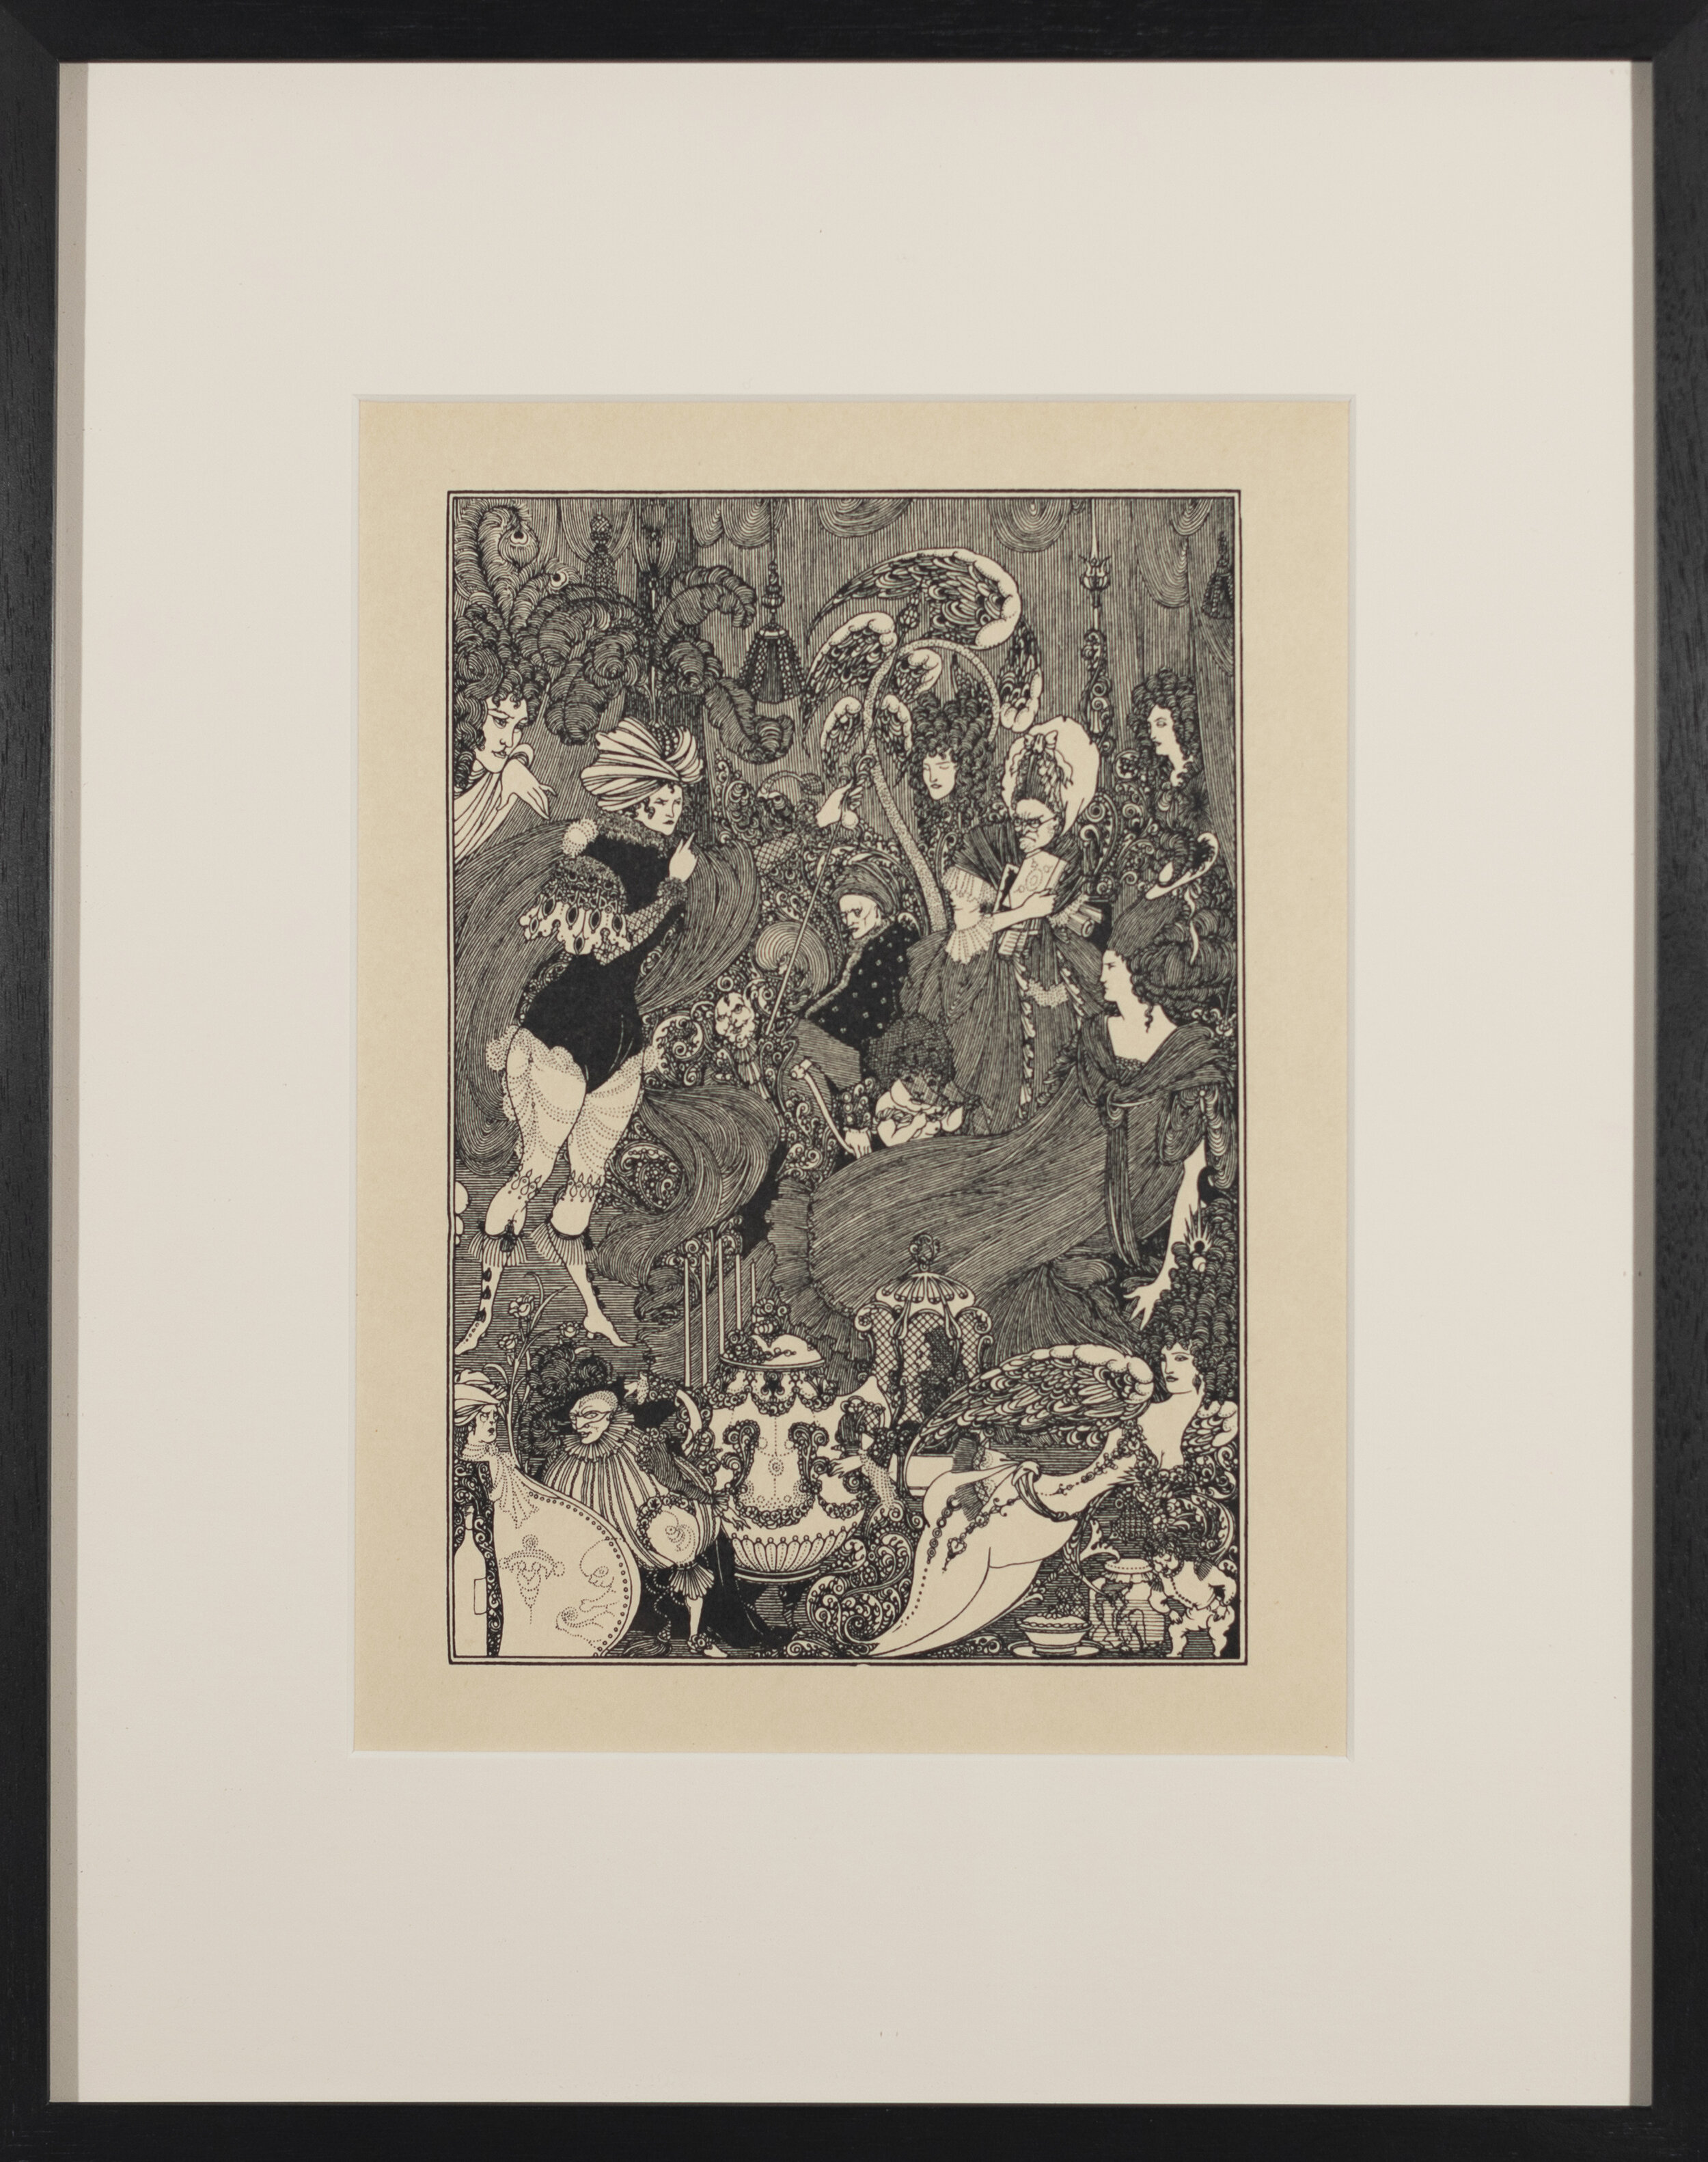  Aubrey Beardsley, Illustration titled The Cave of Spleen. Printed in  The Rape of Lock , by Alexander Pope (Leonard Smithers &amp; Co, London, 1896), ca. 1896, magazine page, 14 3/4" × 11 3/4" (framed) 